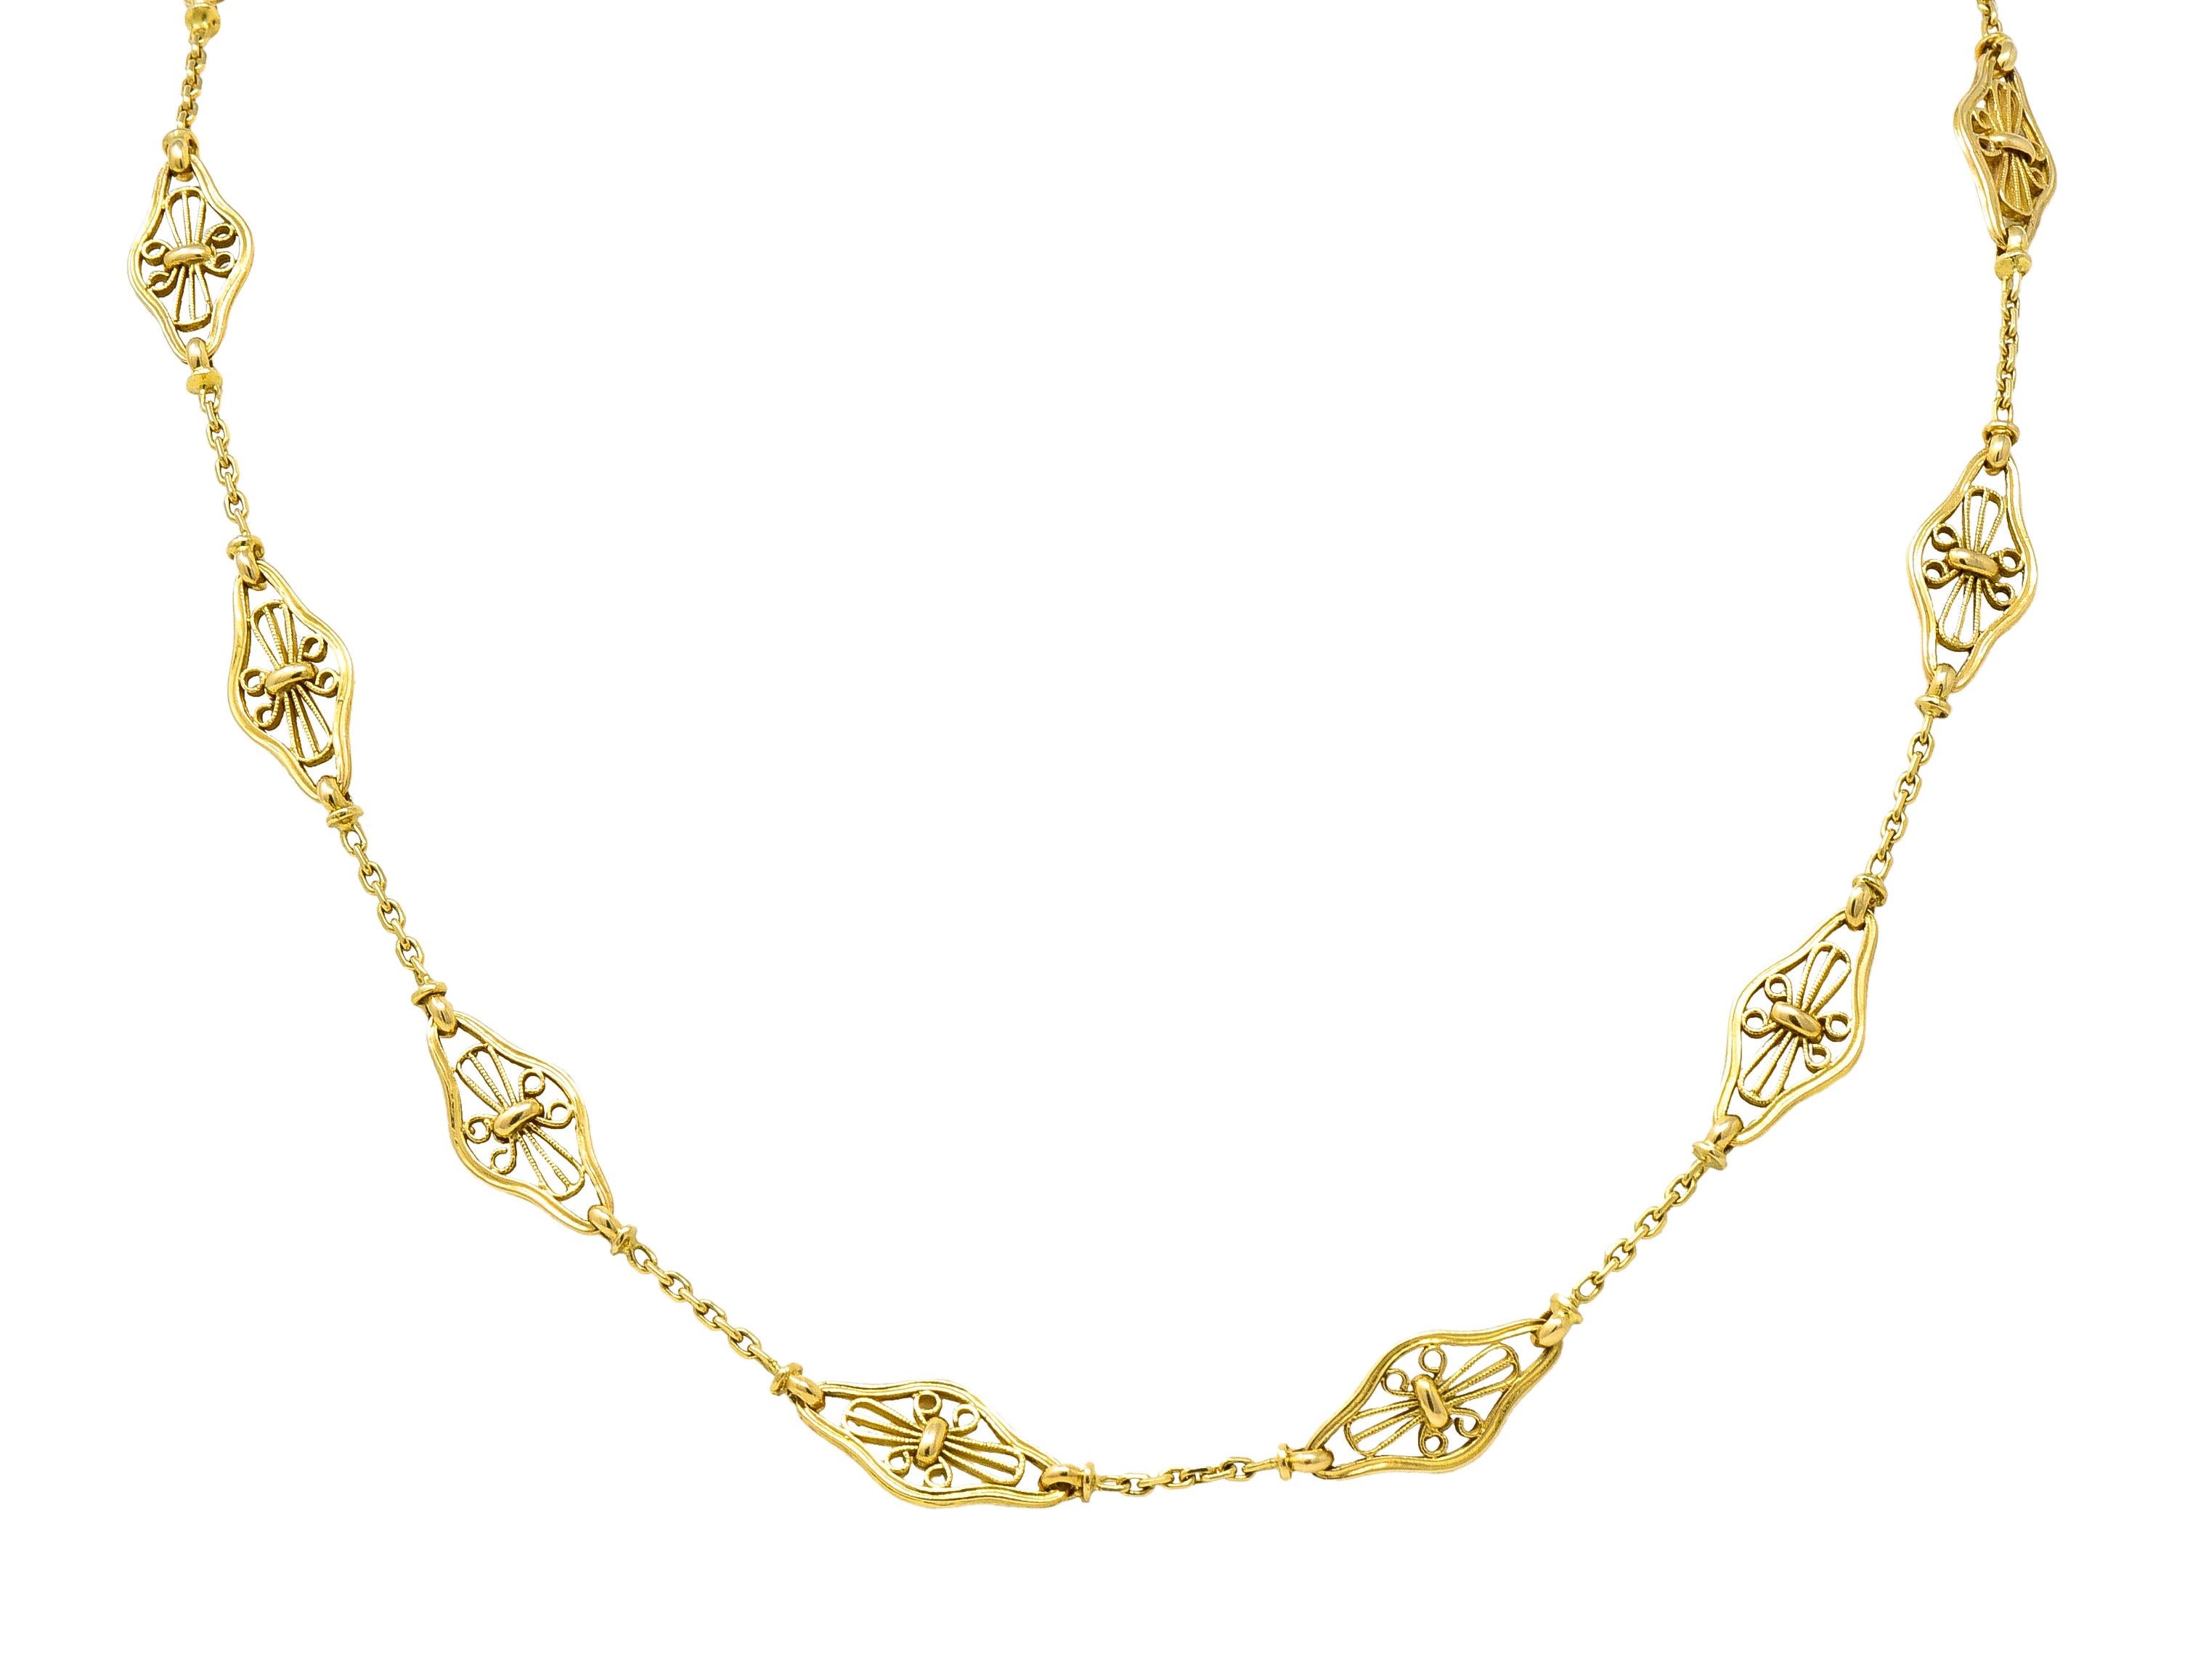 French Victorian 18 Karat Yellow Gold Filigree Navette 30 1/2 Inch Necklace In Excellent Condition For Sale In Philadelphia, PA